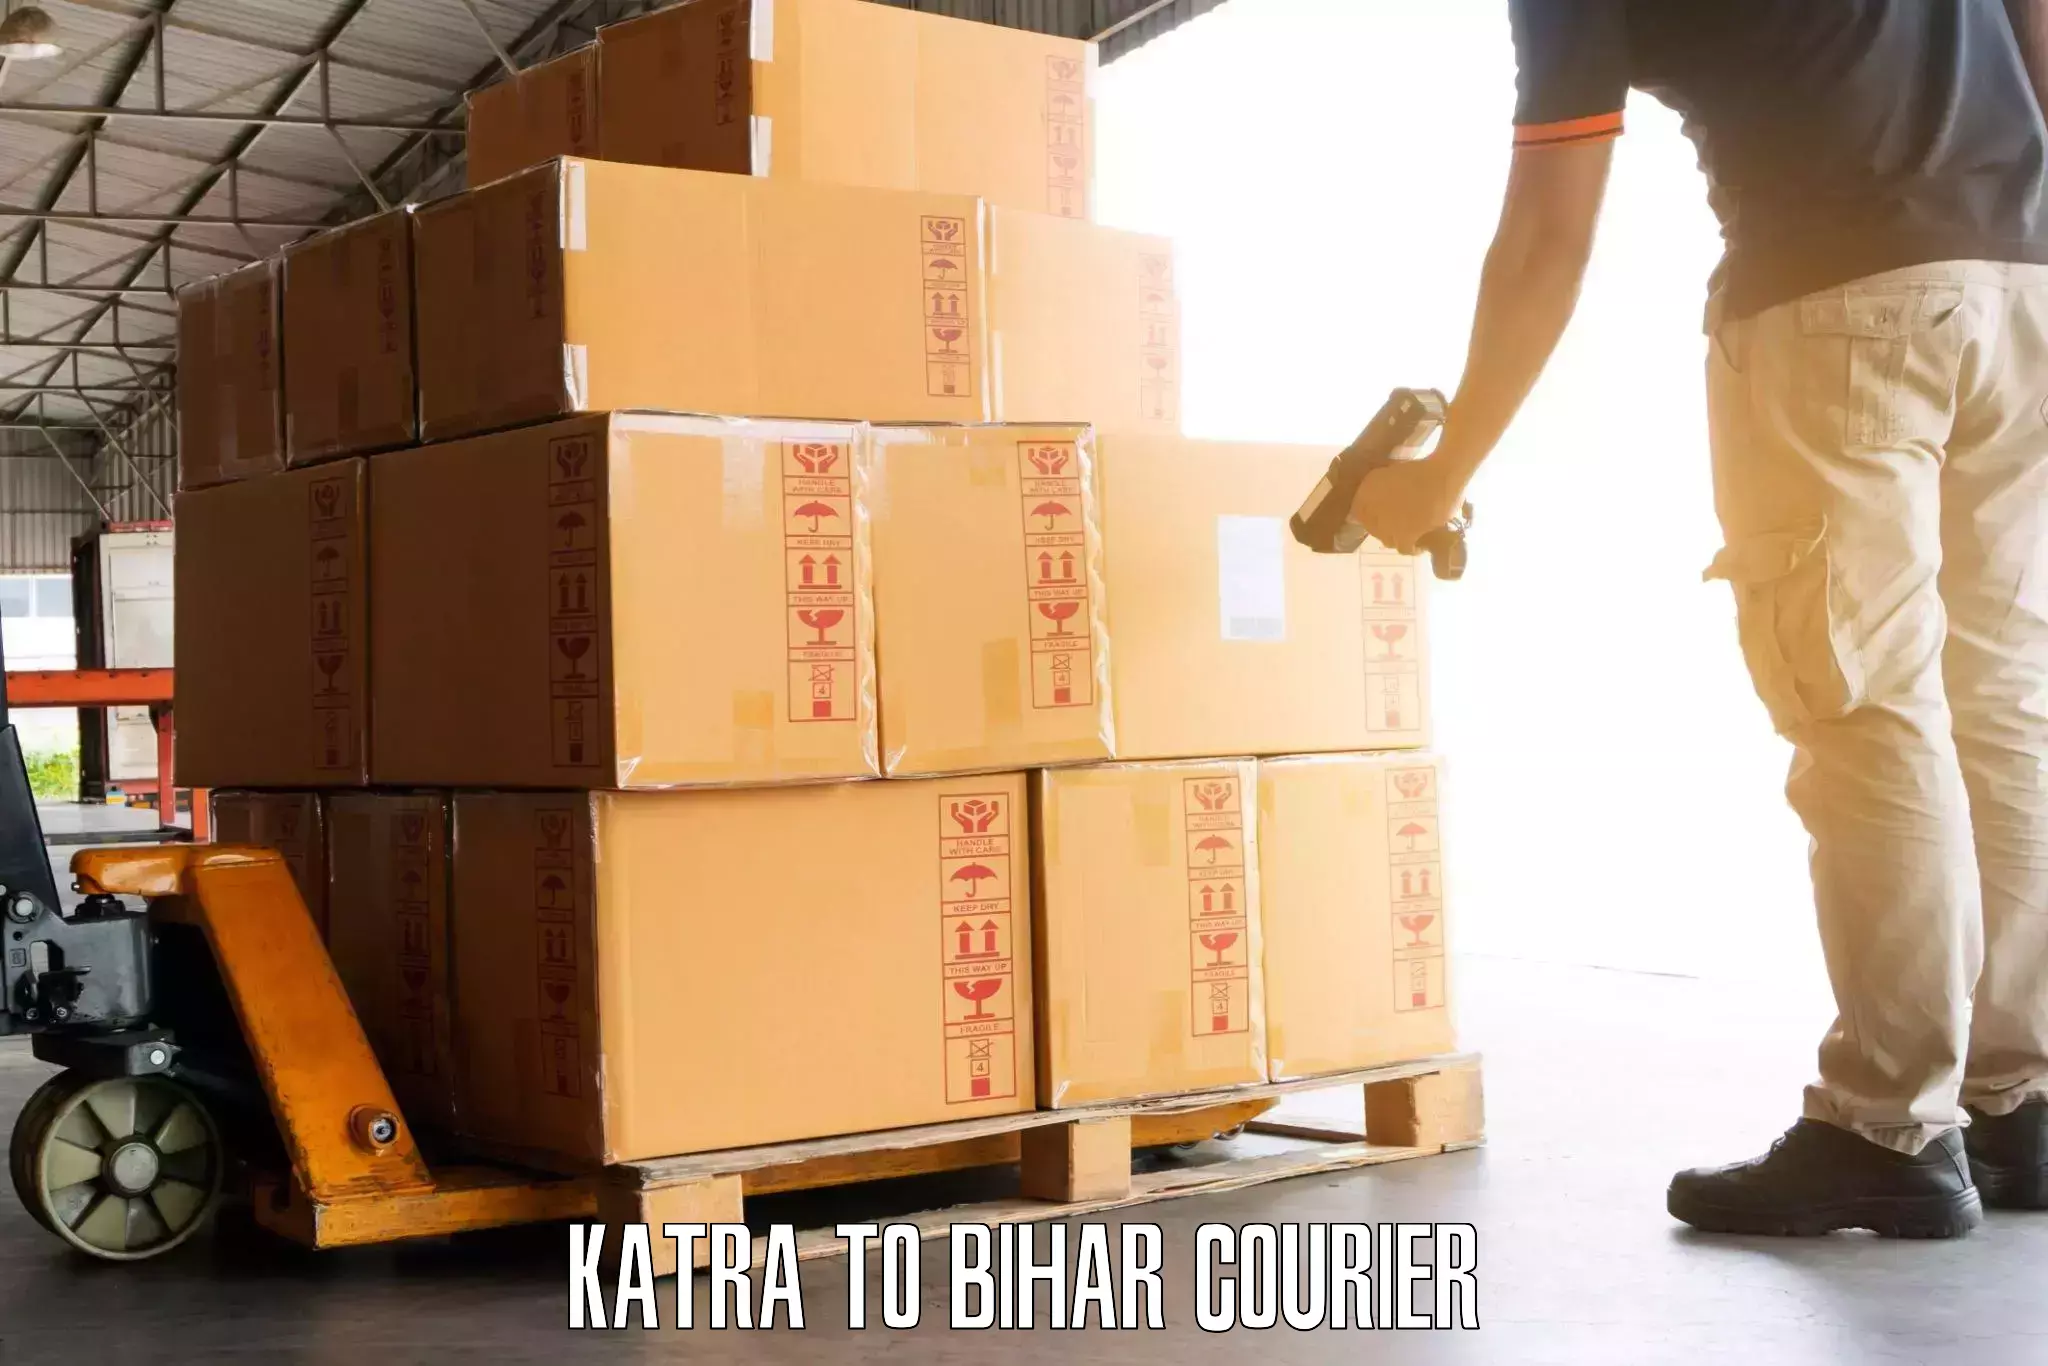 Luggage transport consultancy Katra to Kamtaul